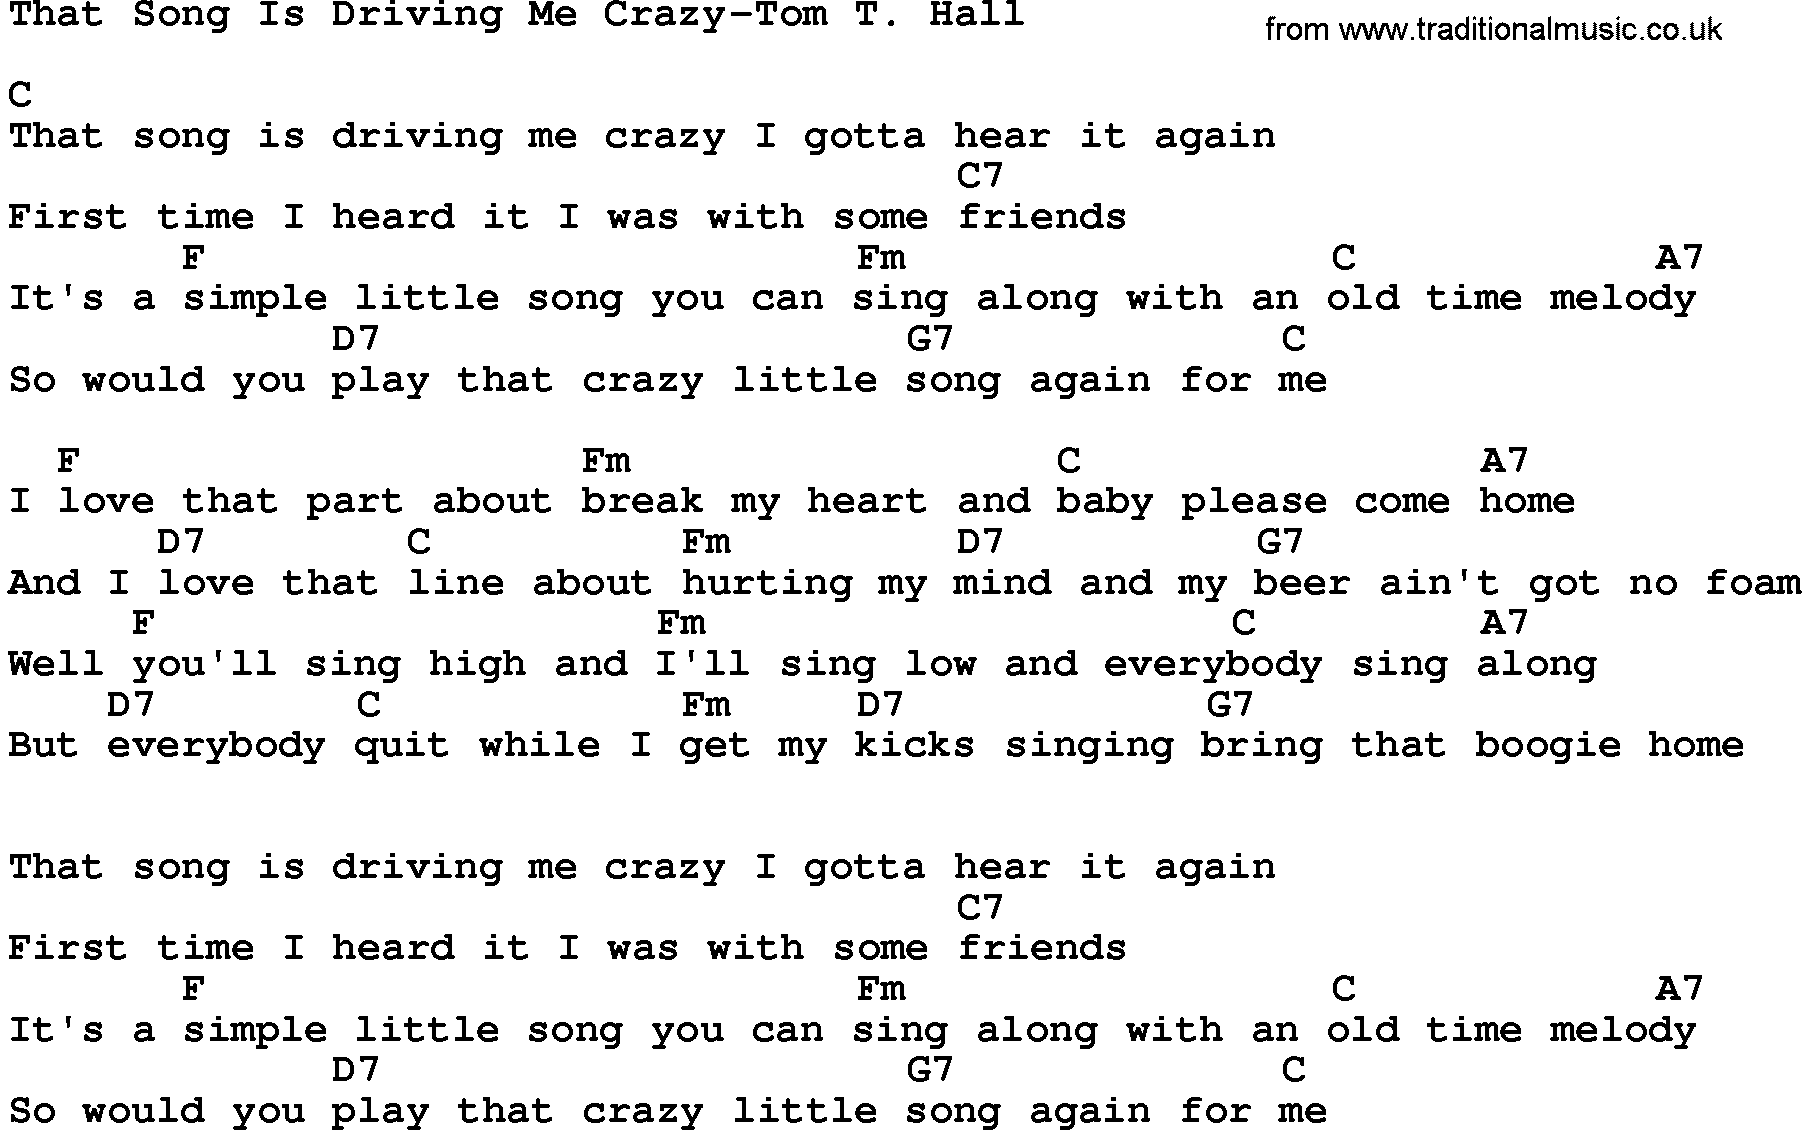 Country music song: That Song Is Driving Me Crazy-Tom T Hall lyrics and chords